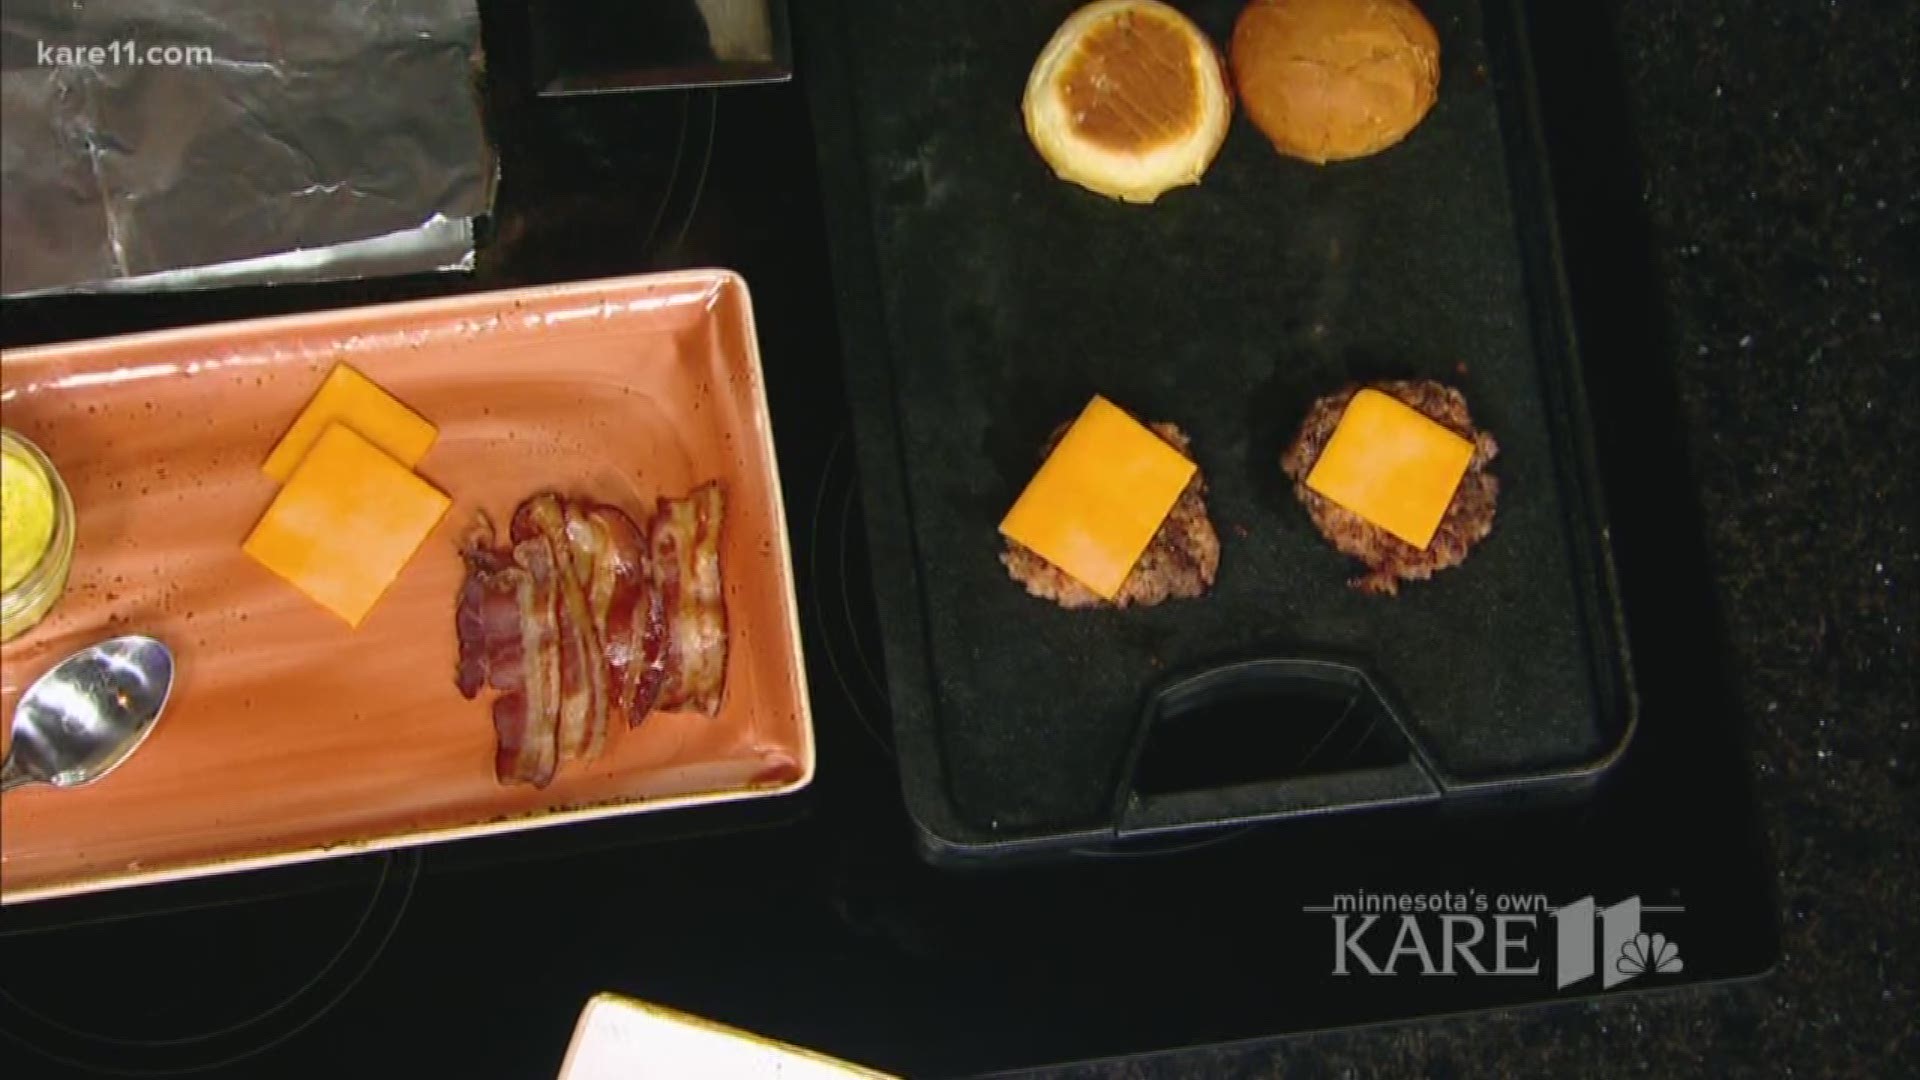 Crowd-pleasing food and drink ideas for Super Bowl from Red Cow. http://kare11.tv/2DzweuK